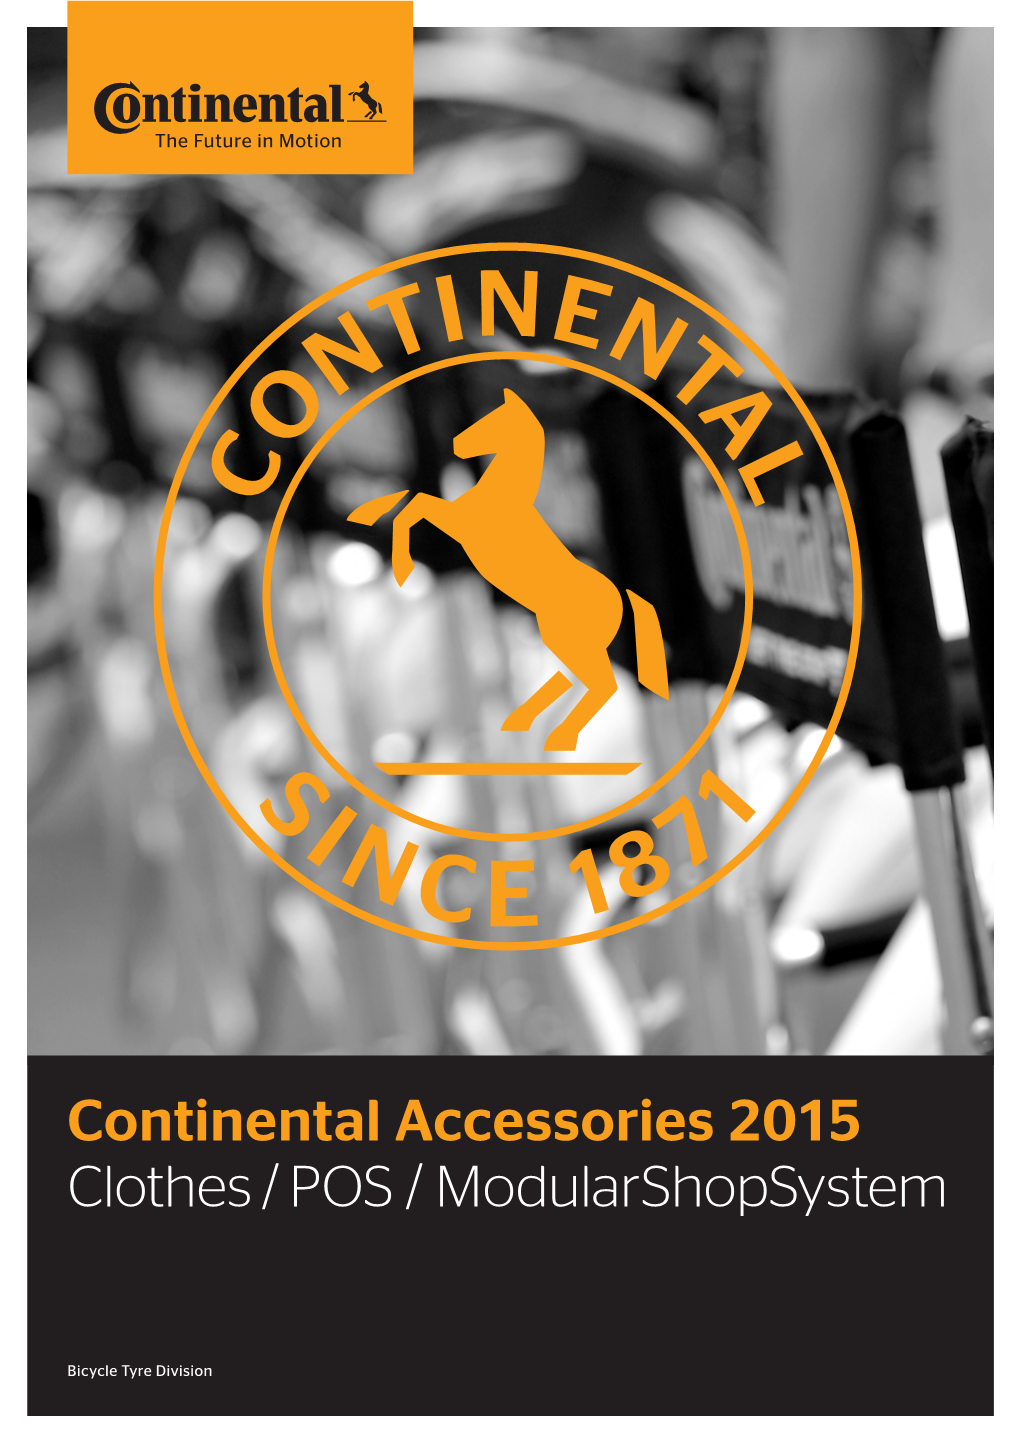 Continental Accessories 2015 Clothes / POS / Modularshopsystem